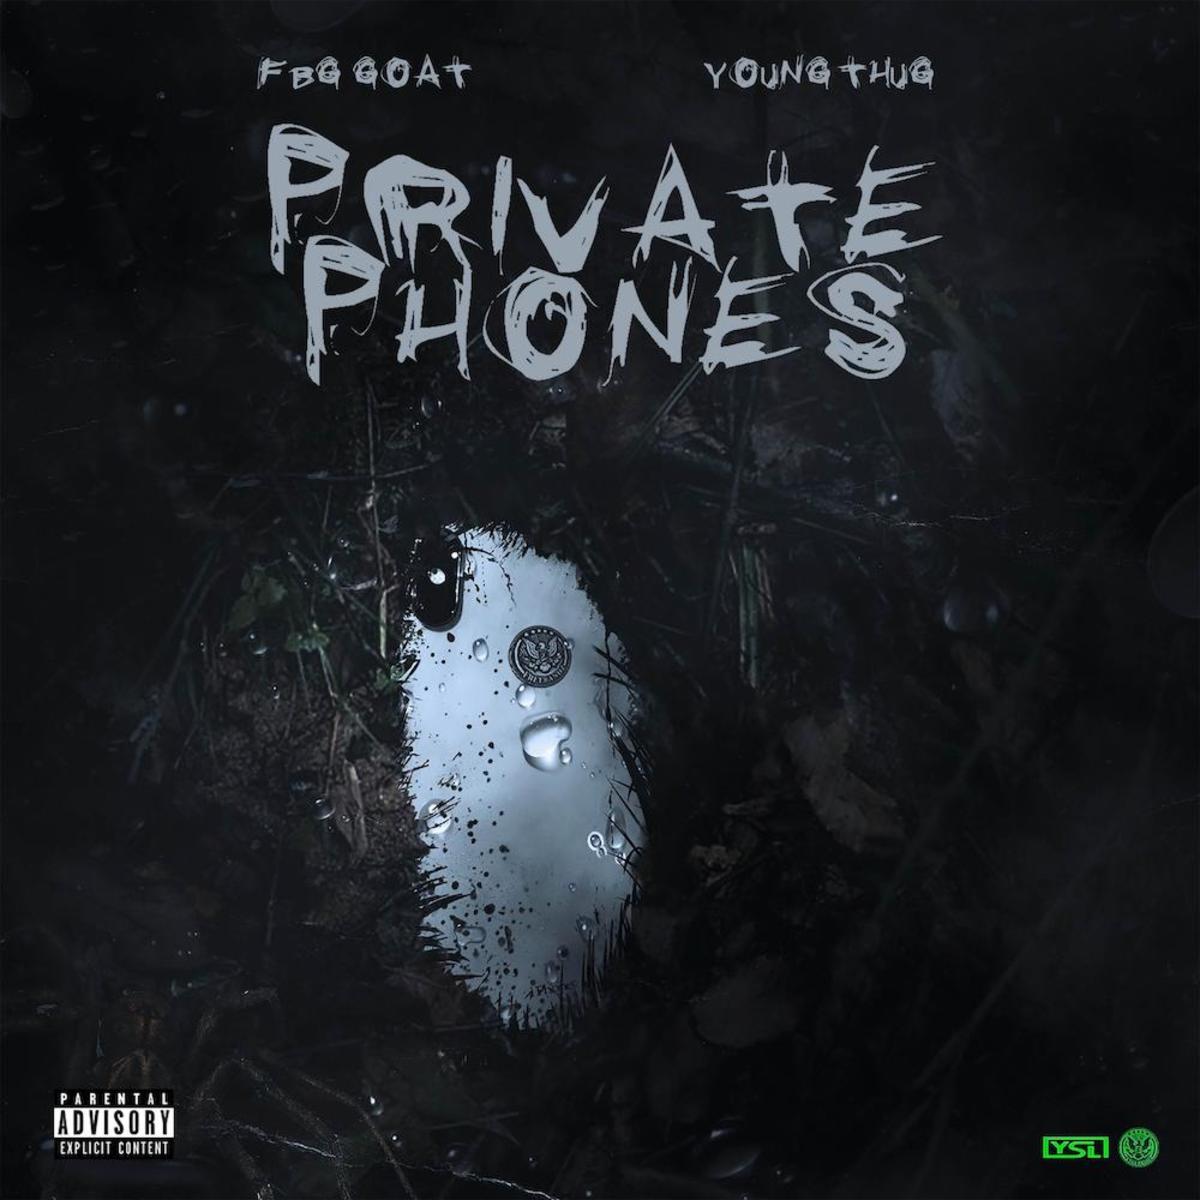 FBG GOAT Feat. Young Thug – “Private Phones” [Audio]